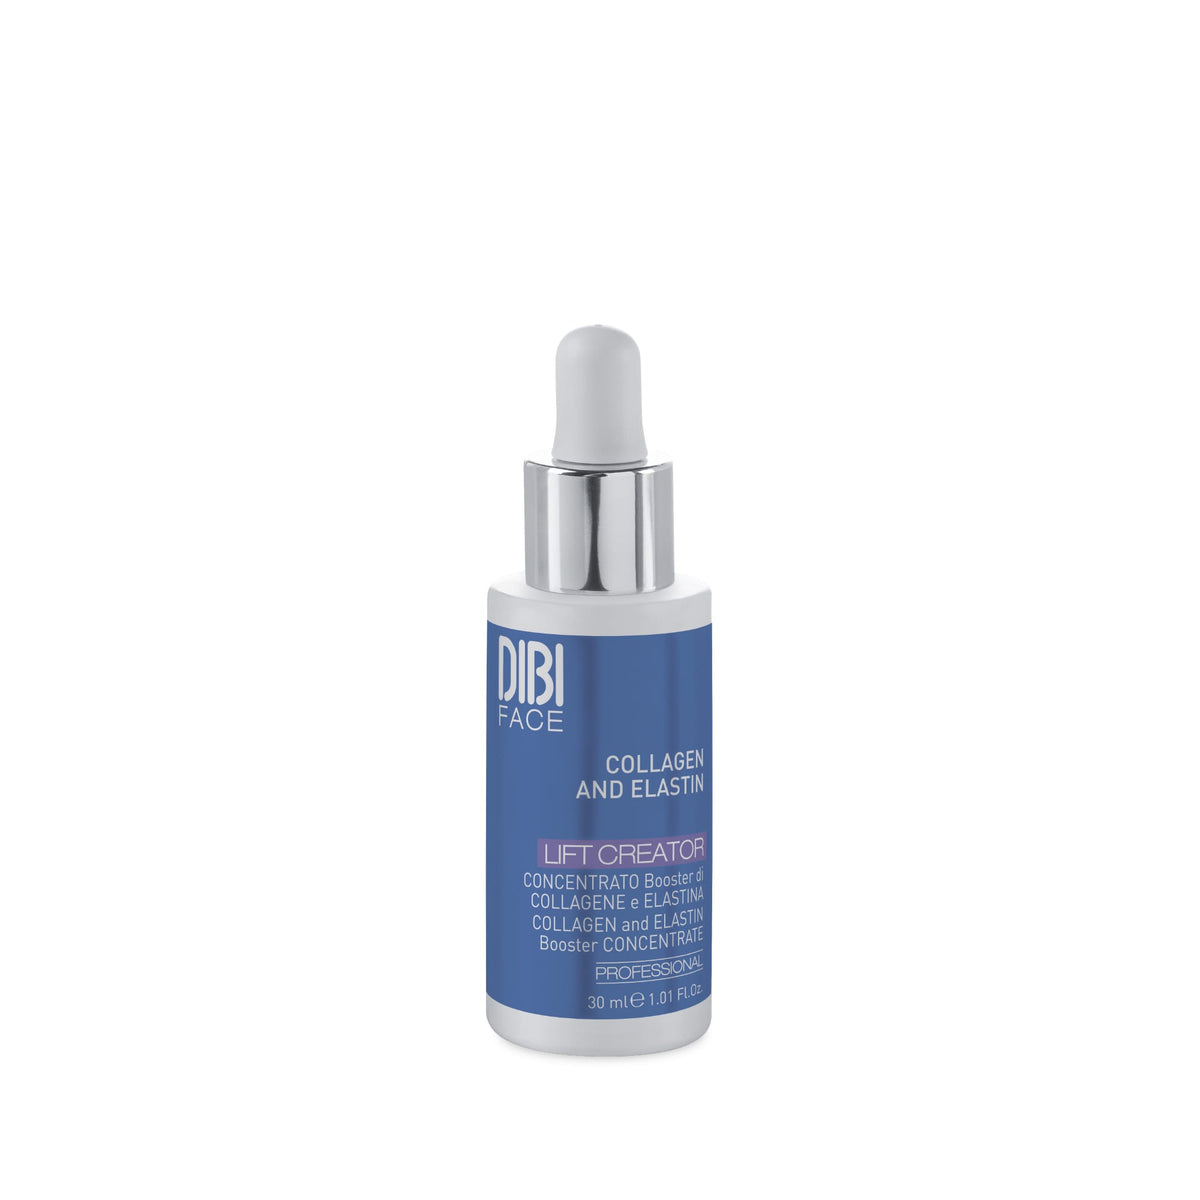 Collagen and Elastin Booster Concentrate - 30ml